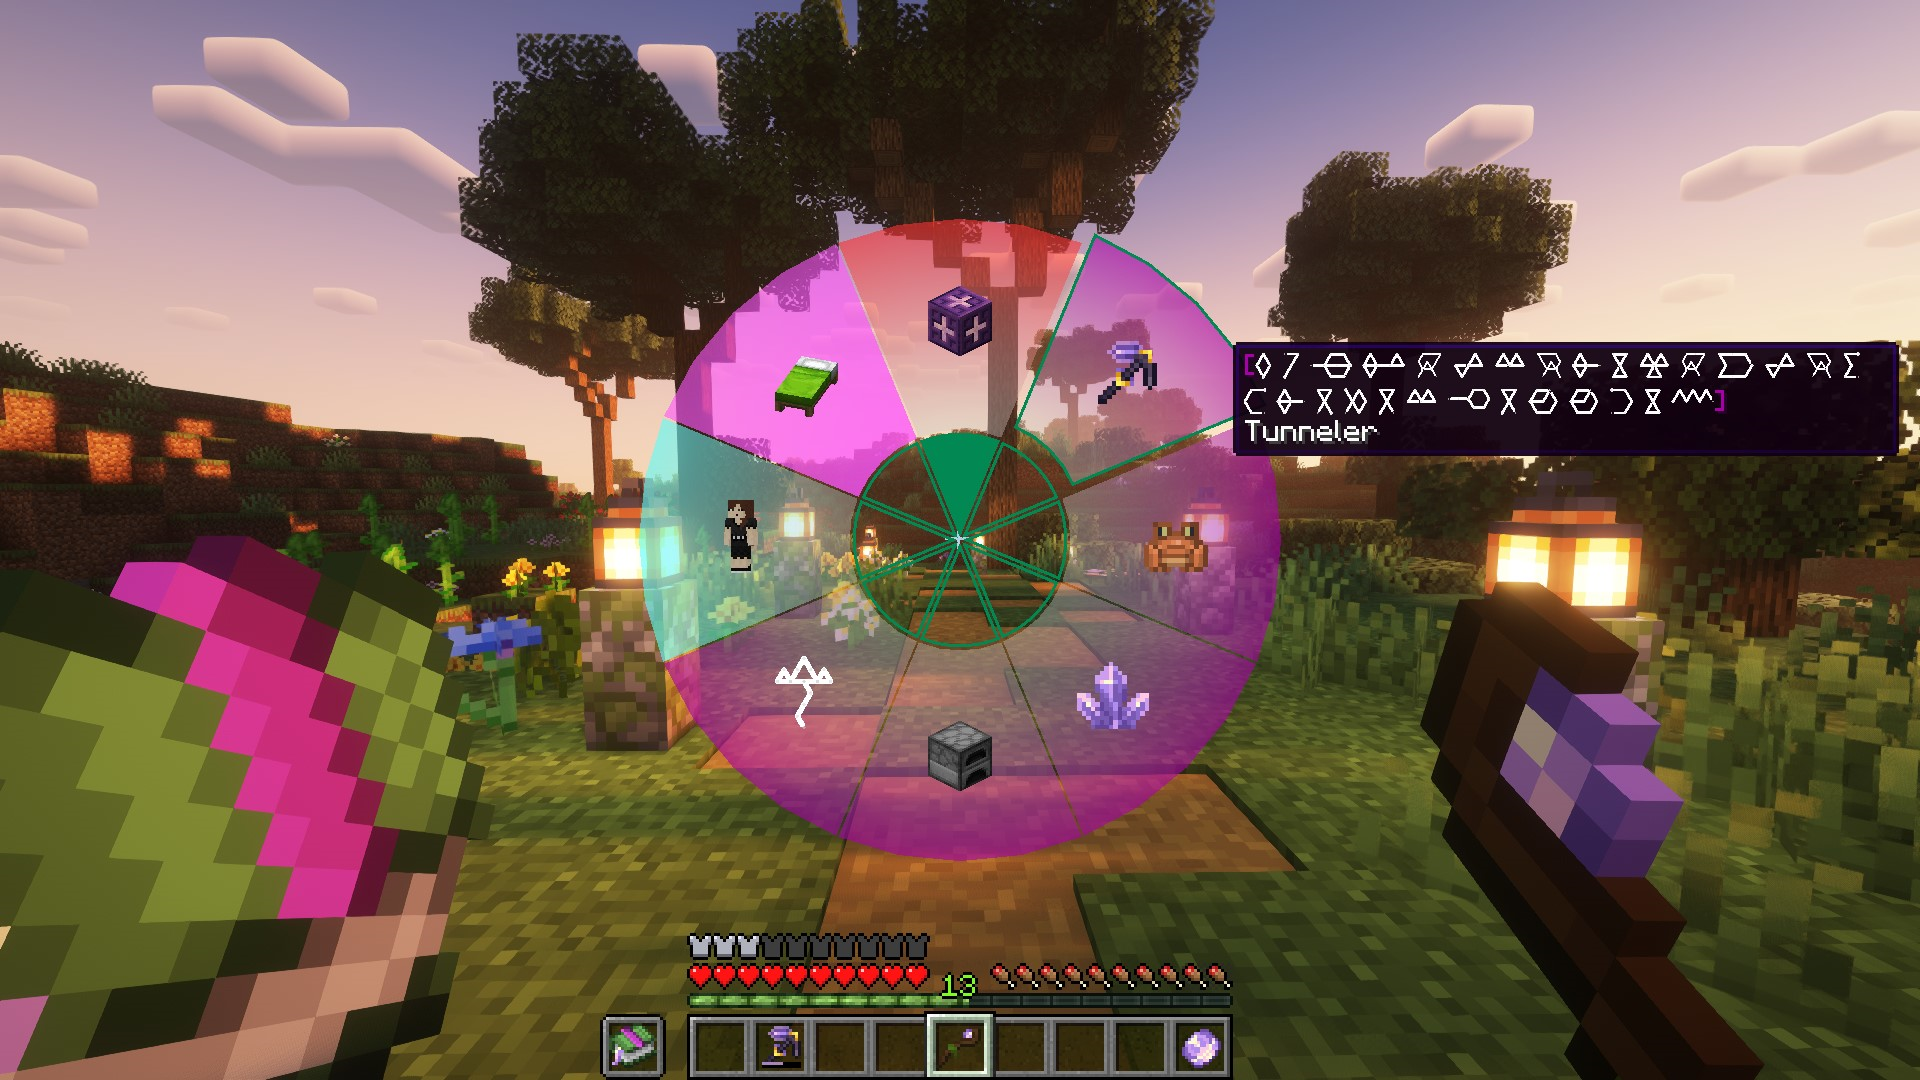 A screenshot of the spellbook radial menu with 8 sections. Each section has an icon. Clockwise from the top these are: Akashic Record Block, Hex Pickaxe, Frogi, Amethyst Cluster, Furnace, Summon Lightning Pattern, A minecraft player, A lime bed. The 2nd section is selected and has a tooltip containing hex patterns for a tunnel making hex labeled Tunneler. The caster is holding a dark oak staff with a dyed green leather-y bit and a dyed green covered spellbook.